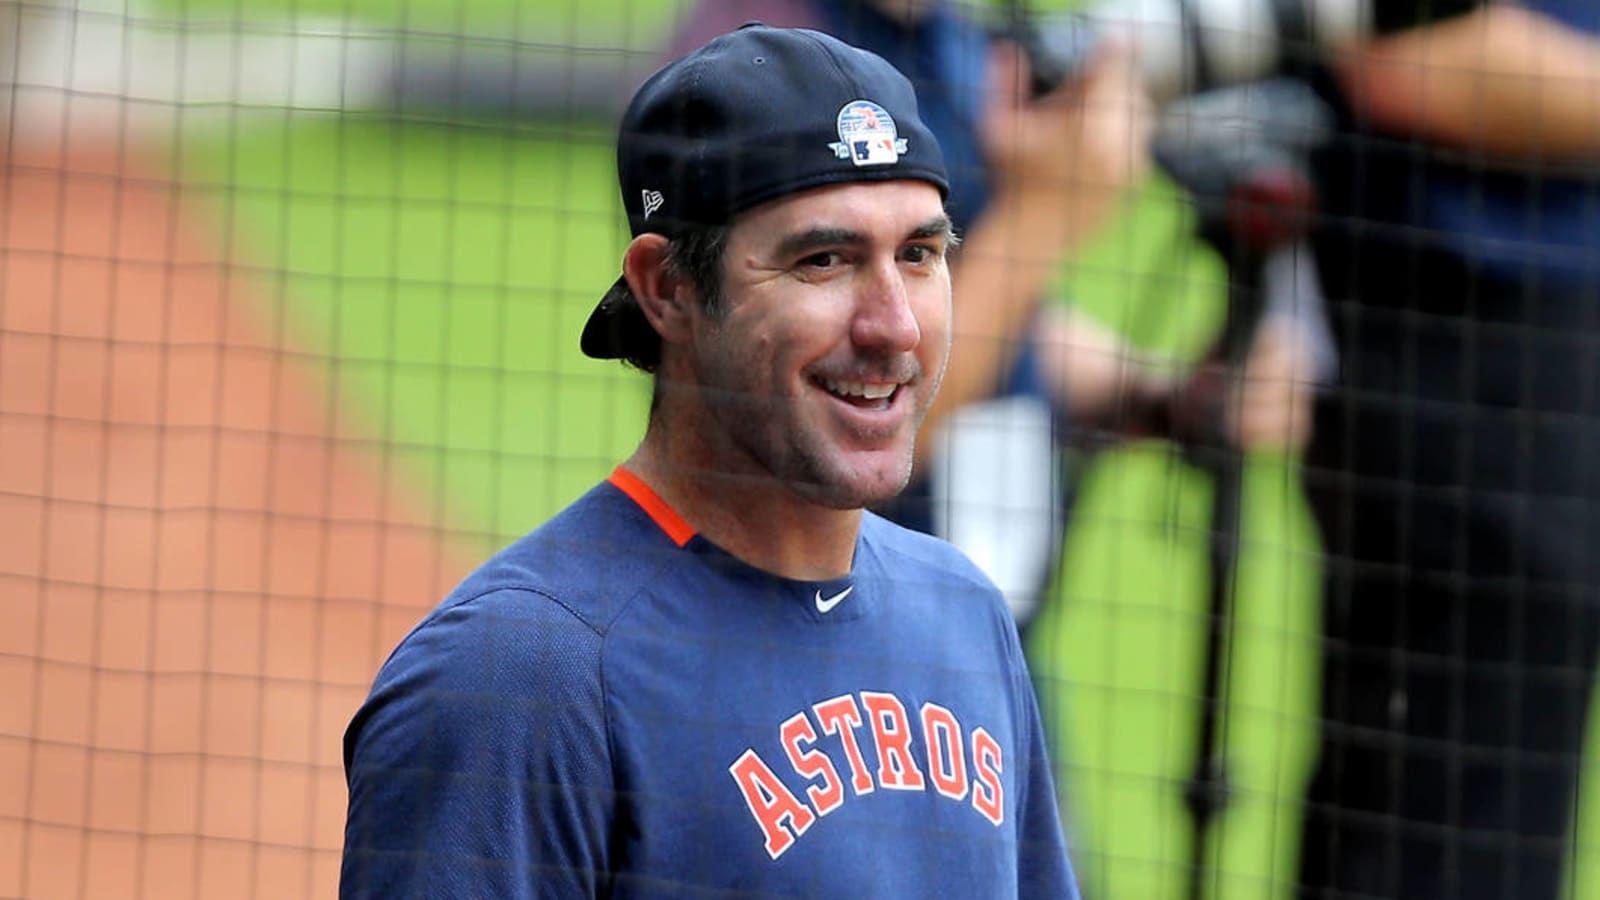 Verlander throws 'first pitch' after Tommy John surgery